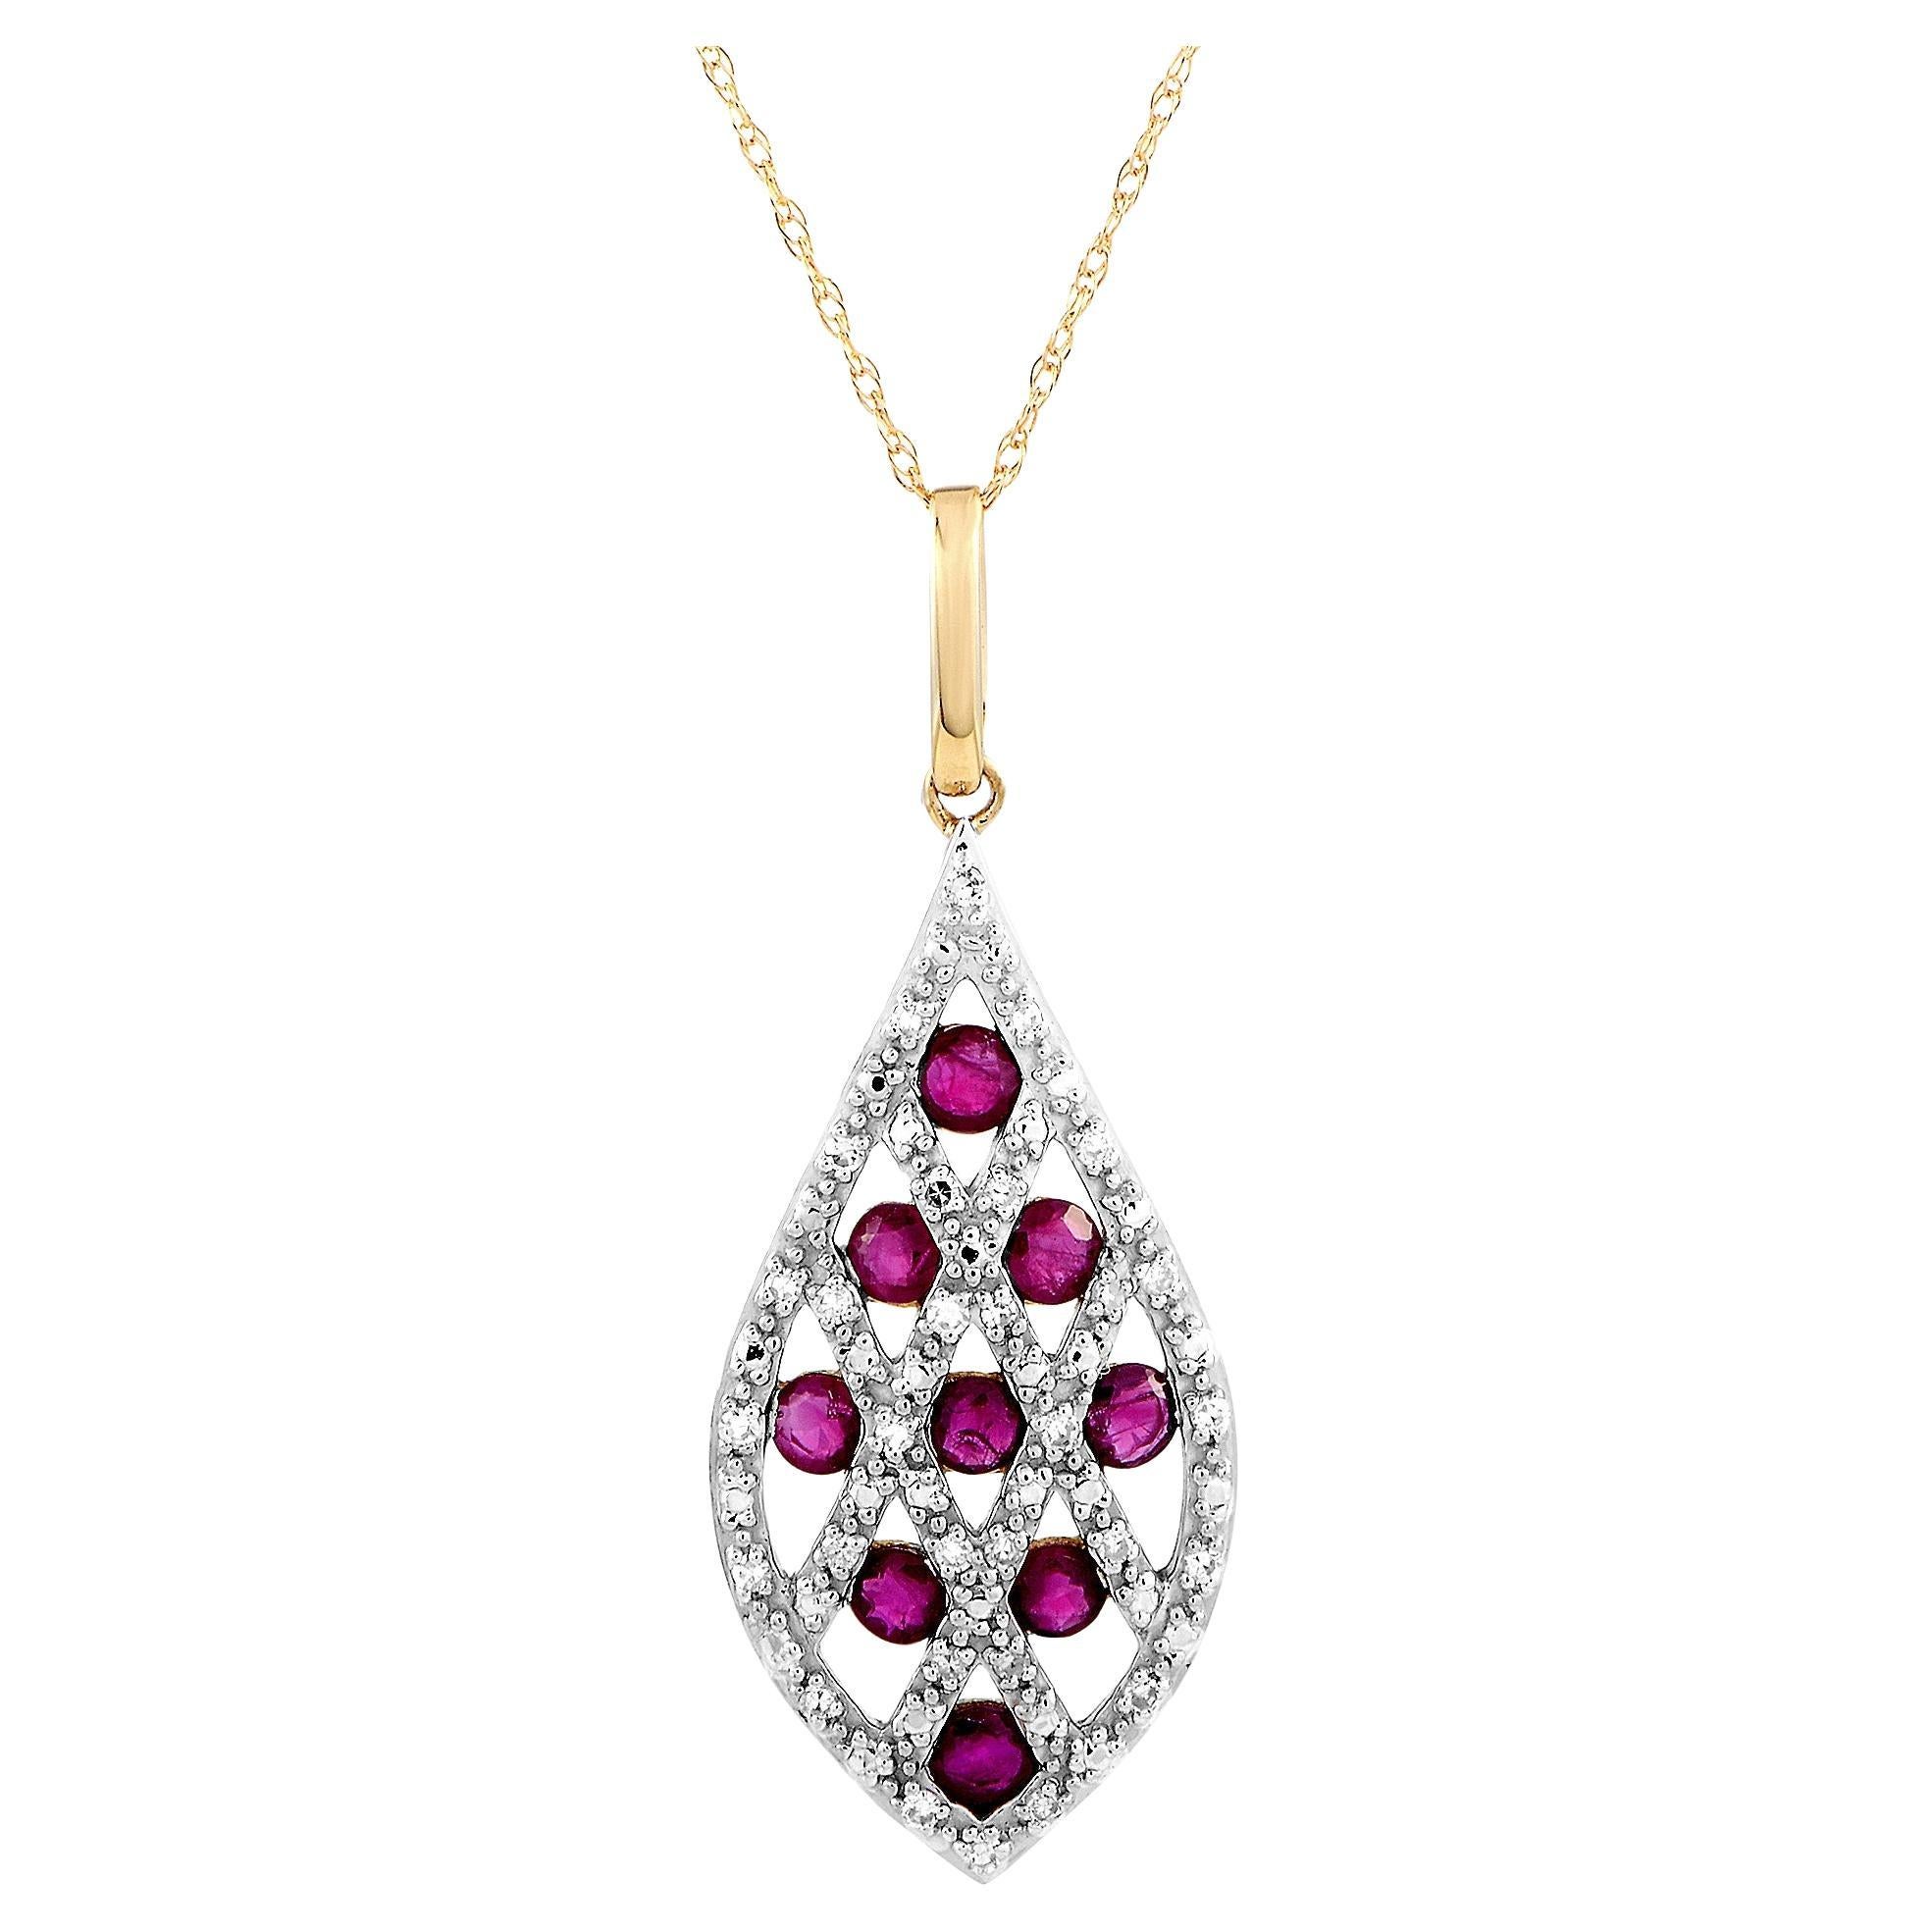 LB Exclusive 14K Yellow Gold Diamond and Ruby Pendant Necklace